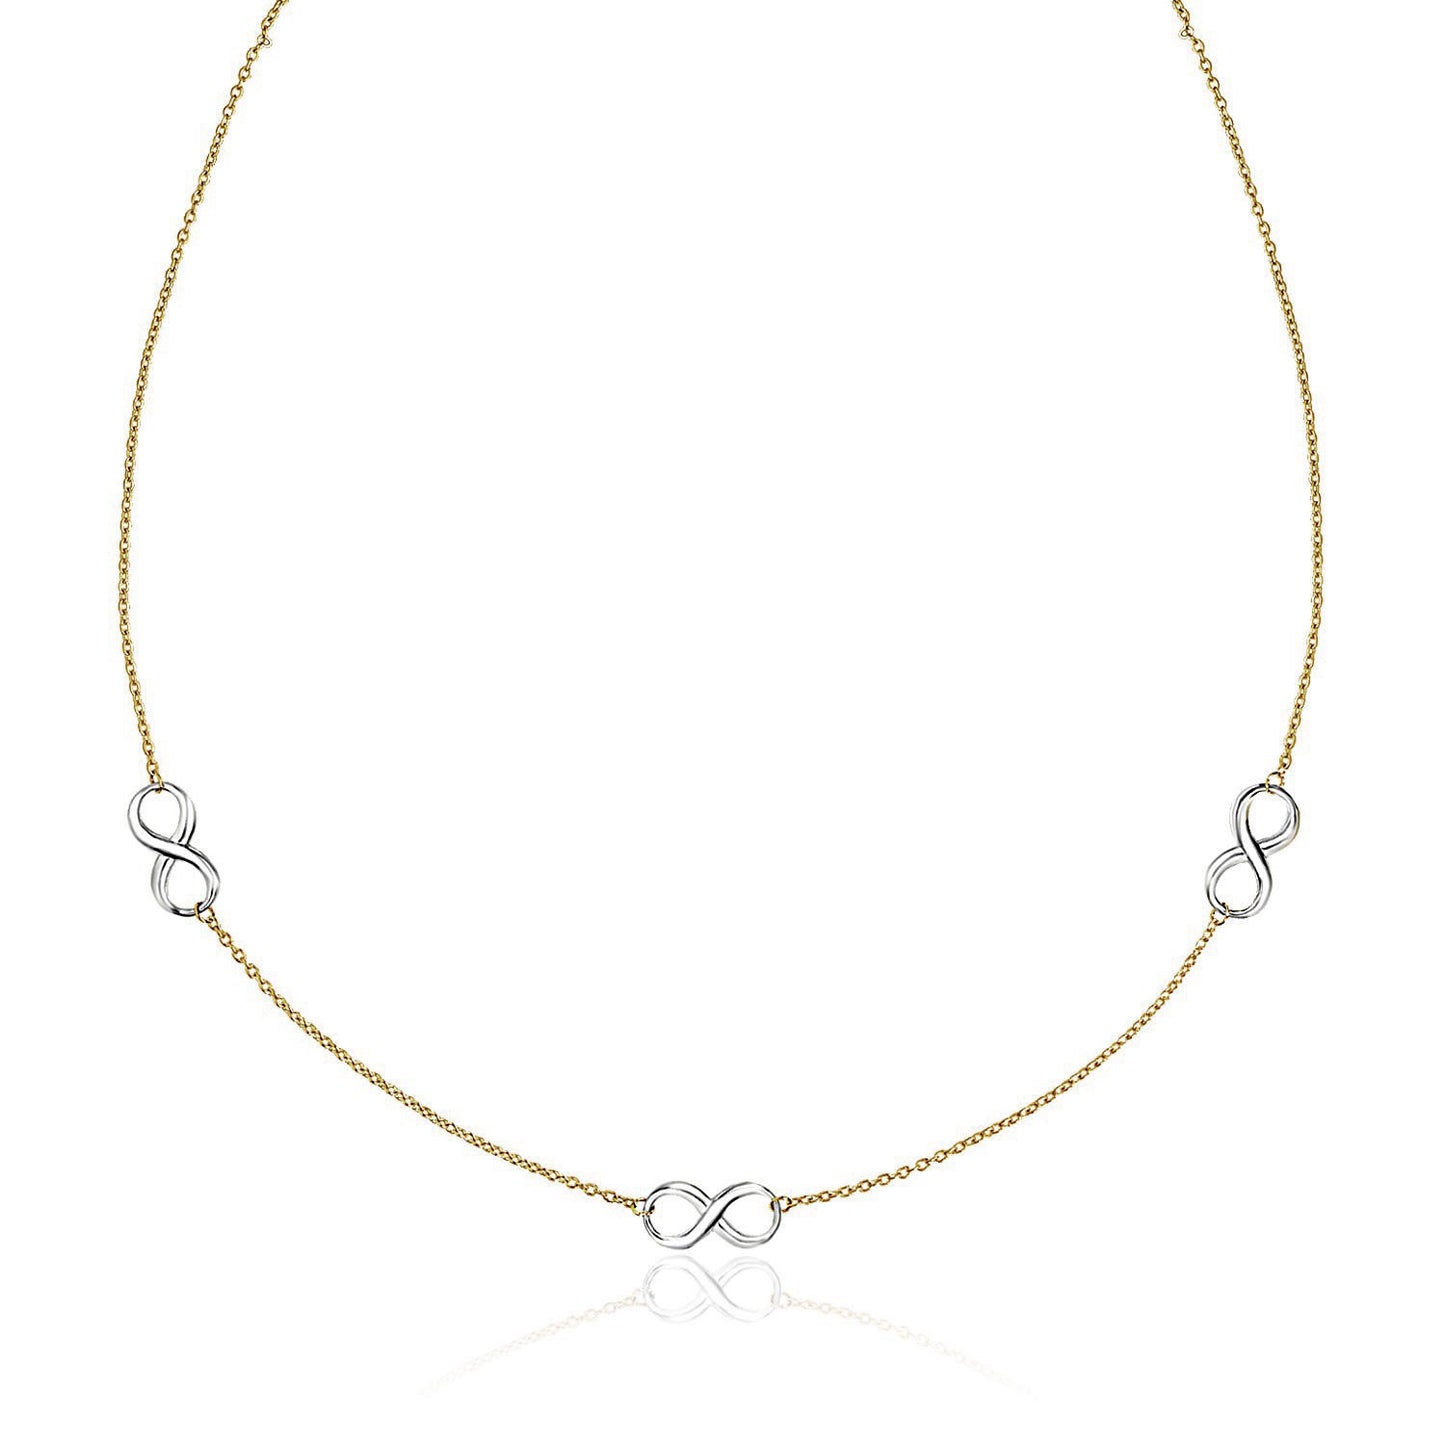 14k Two-Tone Gold Chain Necklace with Polished Infinity Stations